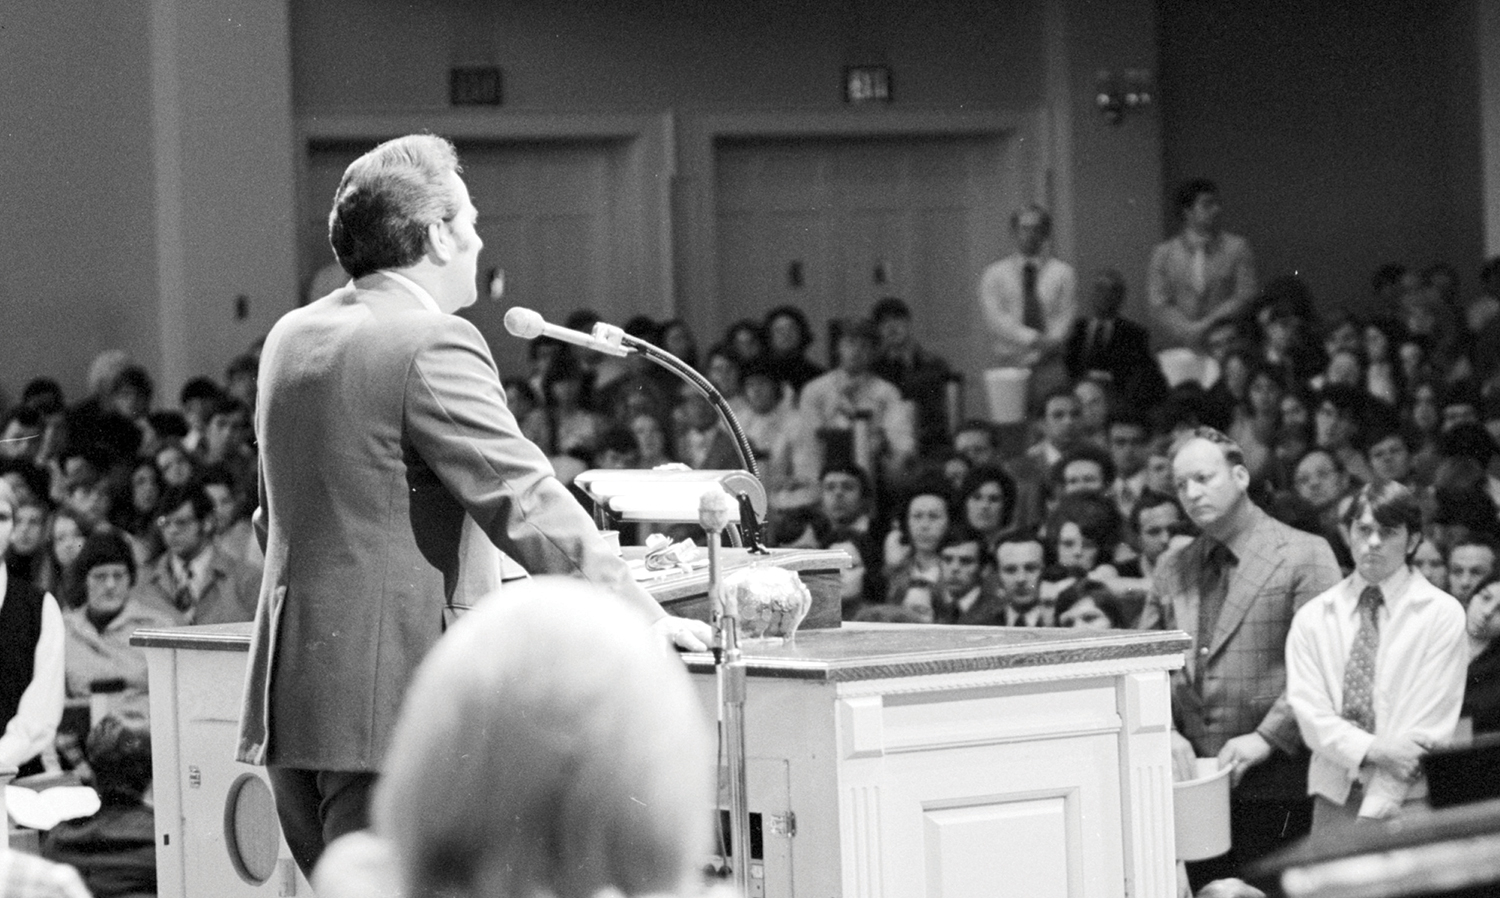 The Rev. Jerry Falwell, Liberty's founder, speaks to a crowd at Thomas Road Baptist Church in 1975.